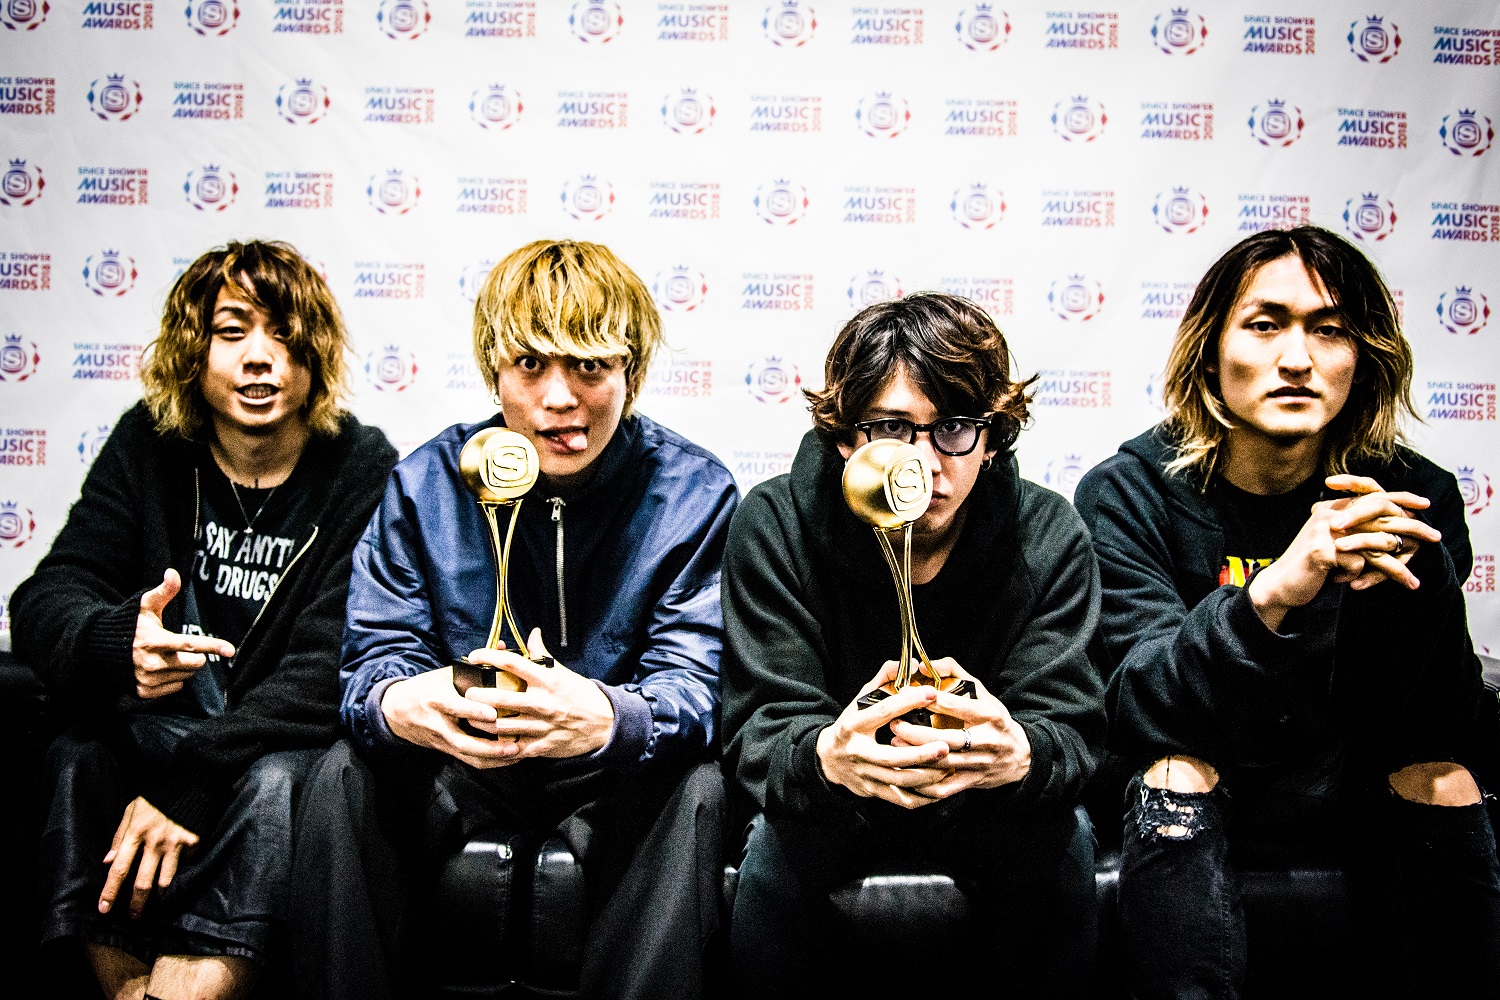 ONE OK ROCK - SPACE SHOWER MUSIC AWARDS 2018